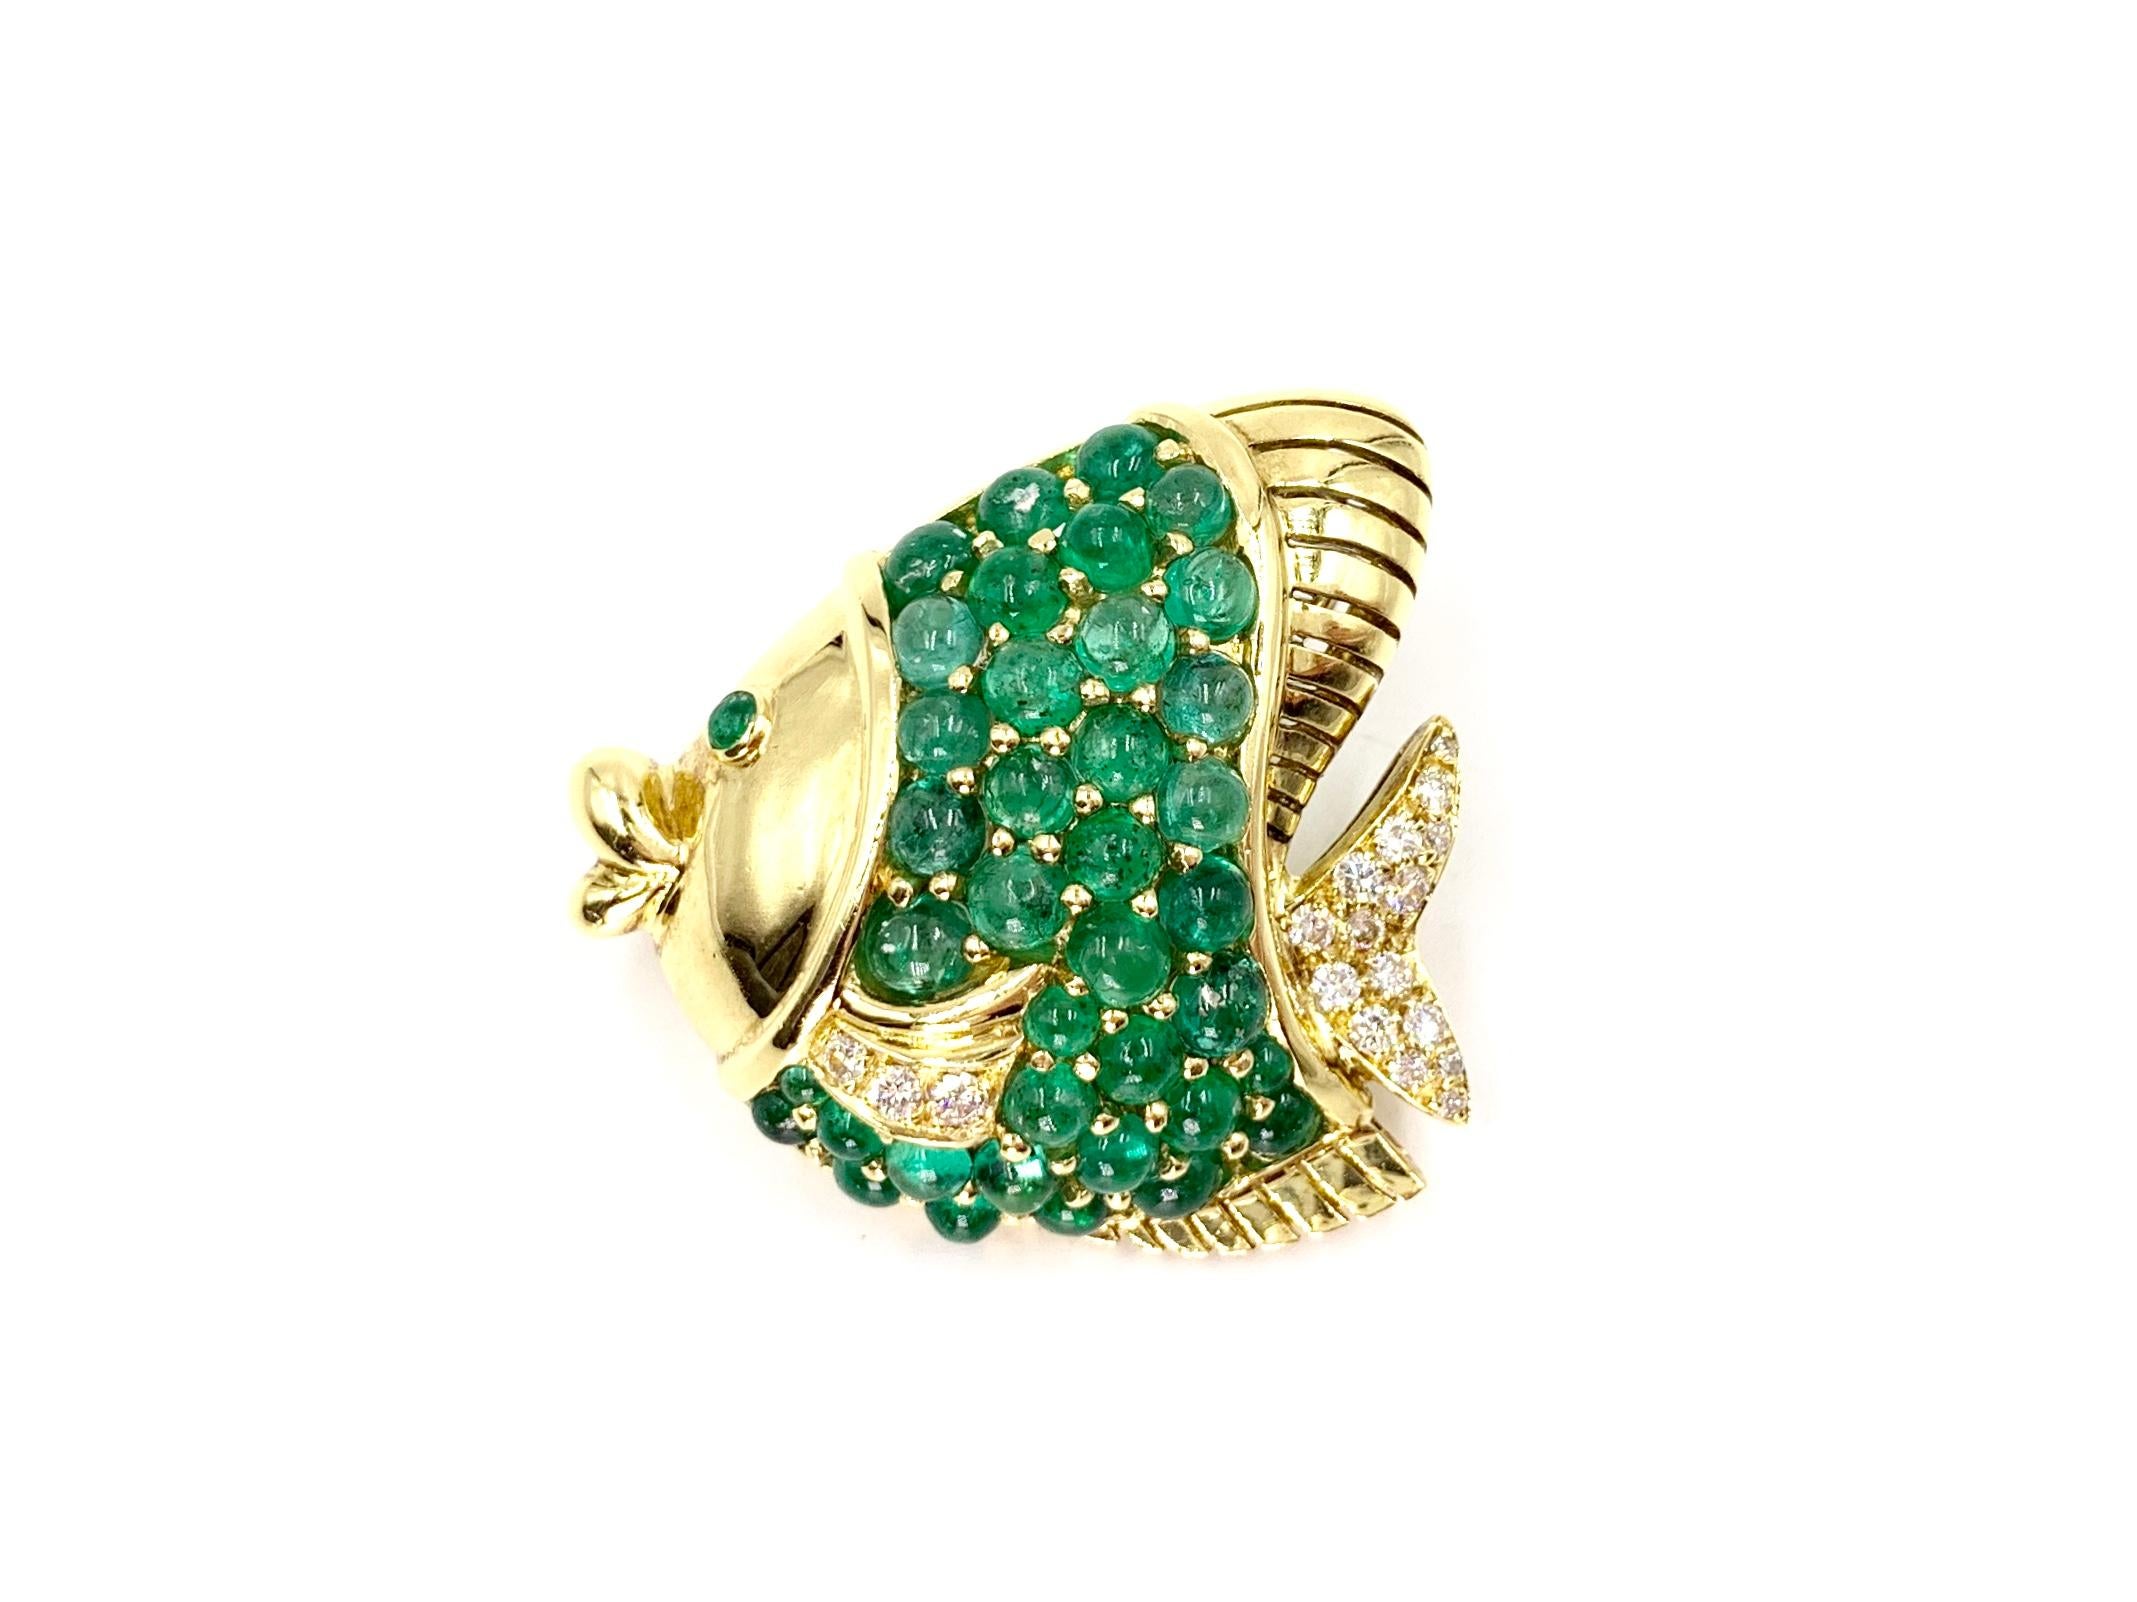 A whimsical and beautiful 18 karat yellow gold puckering fish pendant that doubles as a brooch. Fish contains 7.73 carats of cabochon genuine emeralds and .36 carats of white round brilliant diamonds. Diamond quality is approximately F color, VS2